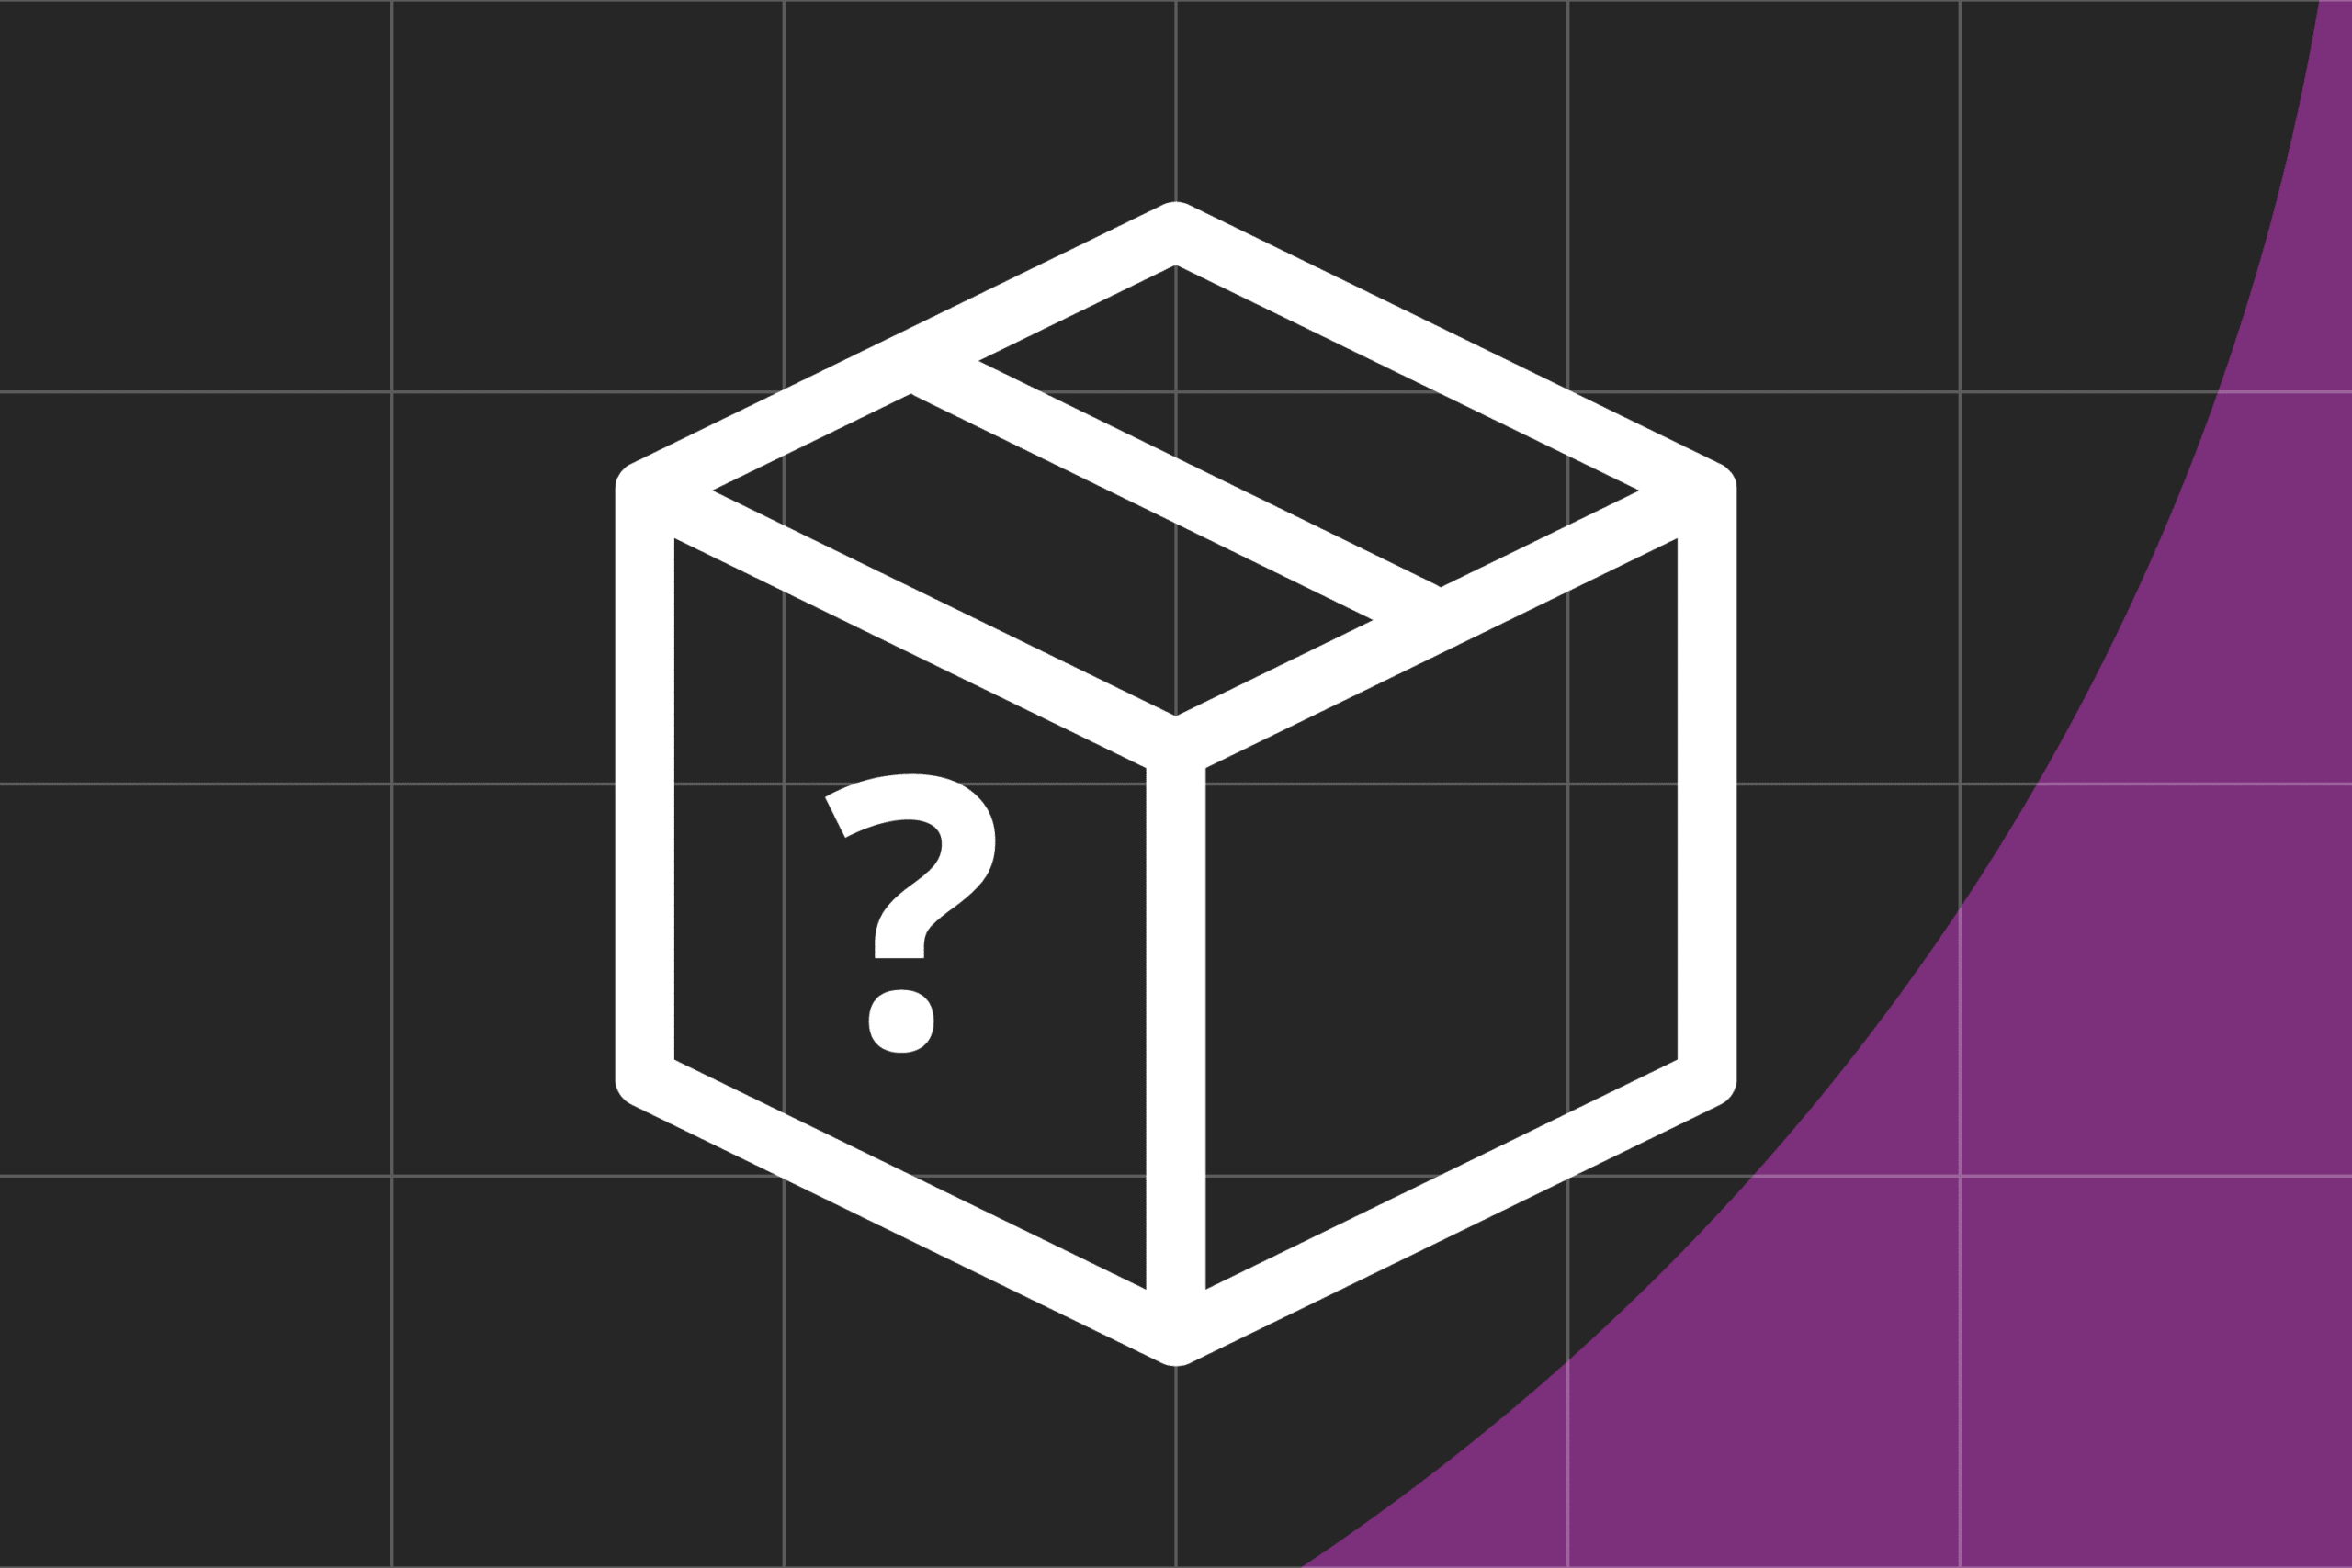 podcast cover art: box with question mark